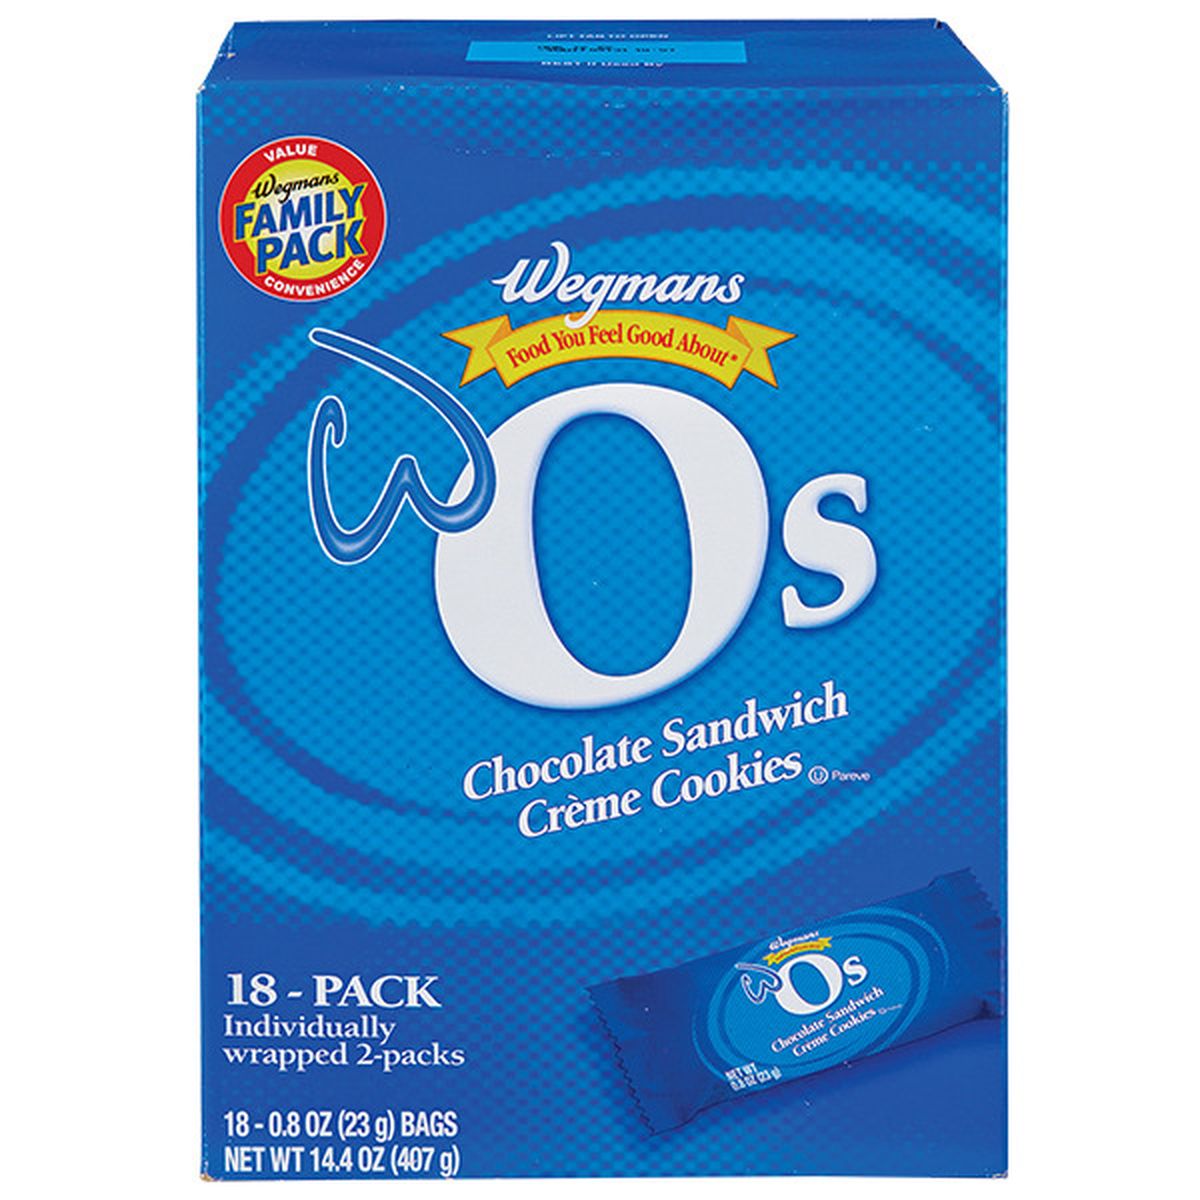 Calories in Wegmans W O's Chocolate Sandwich Creme Cookies, 18-Pack, FAMILY PACK